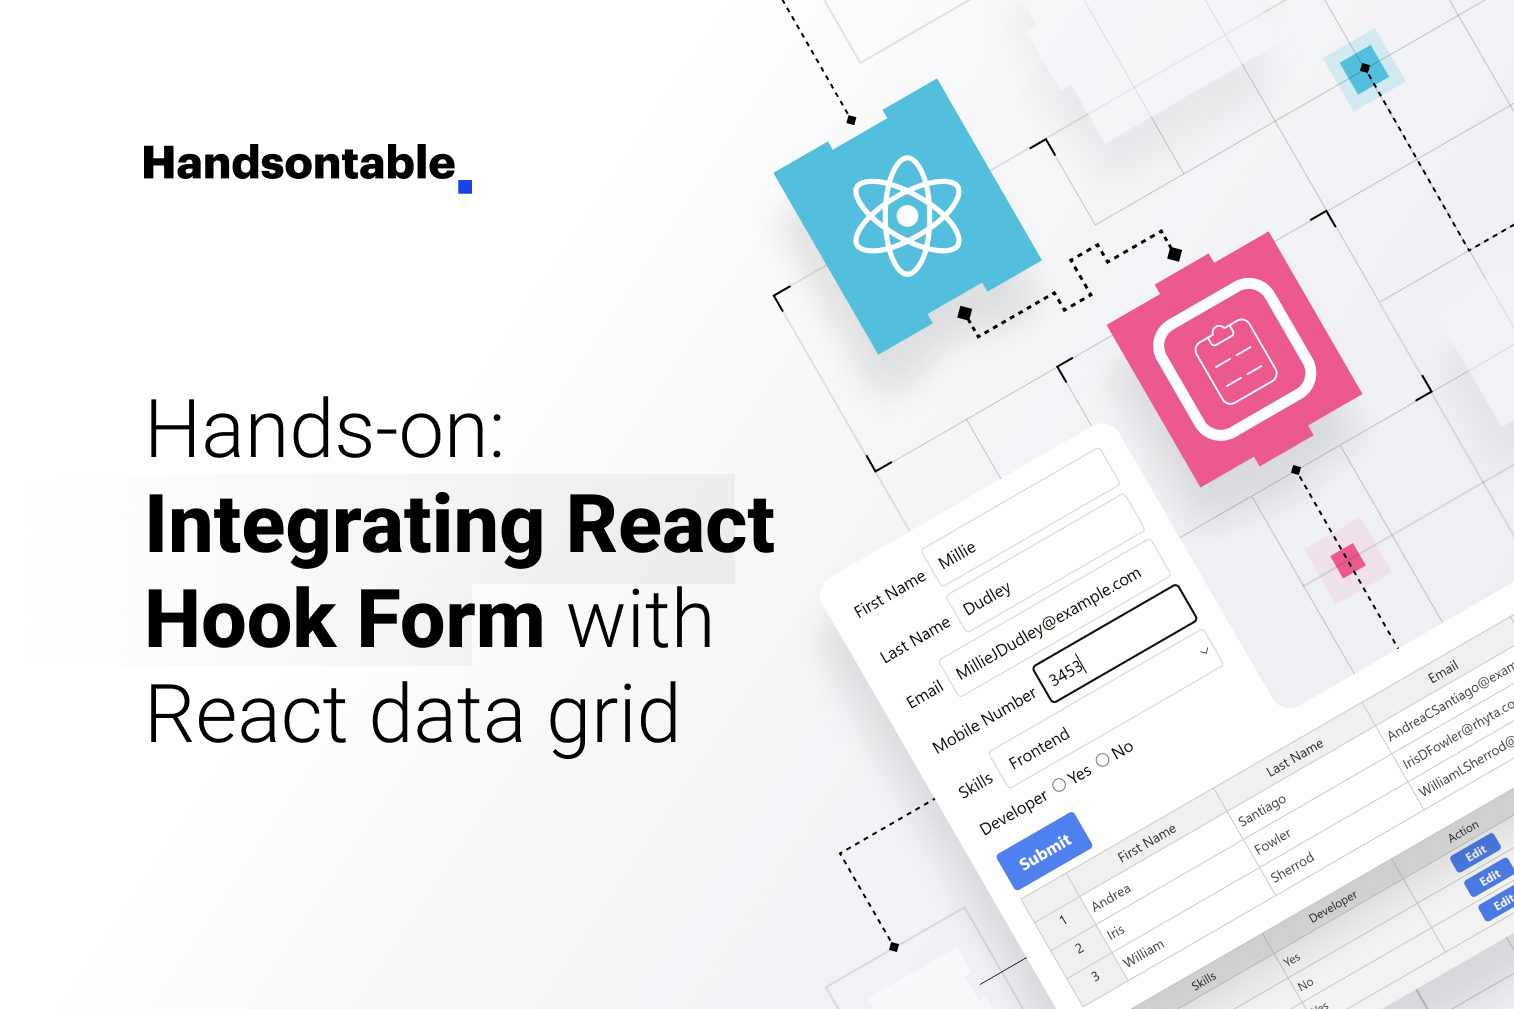 Hands-on: Integrating React Hook Form with React data grid